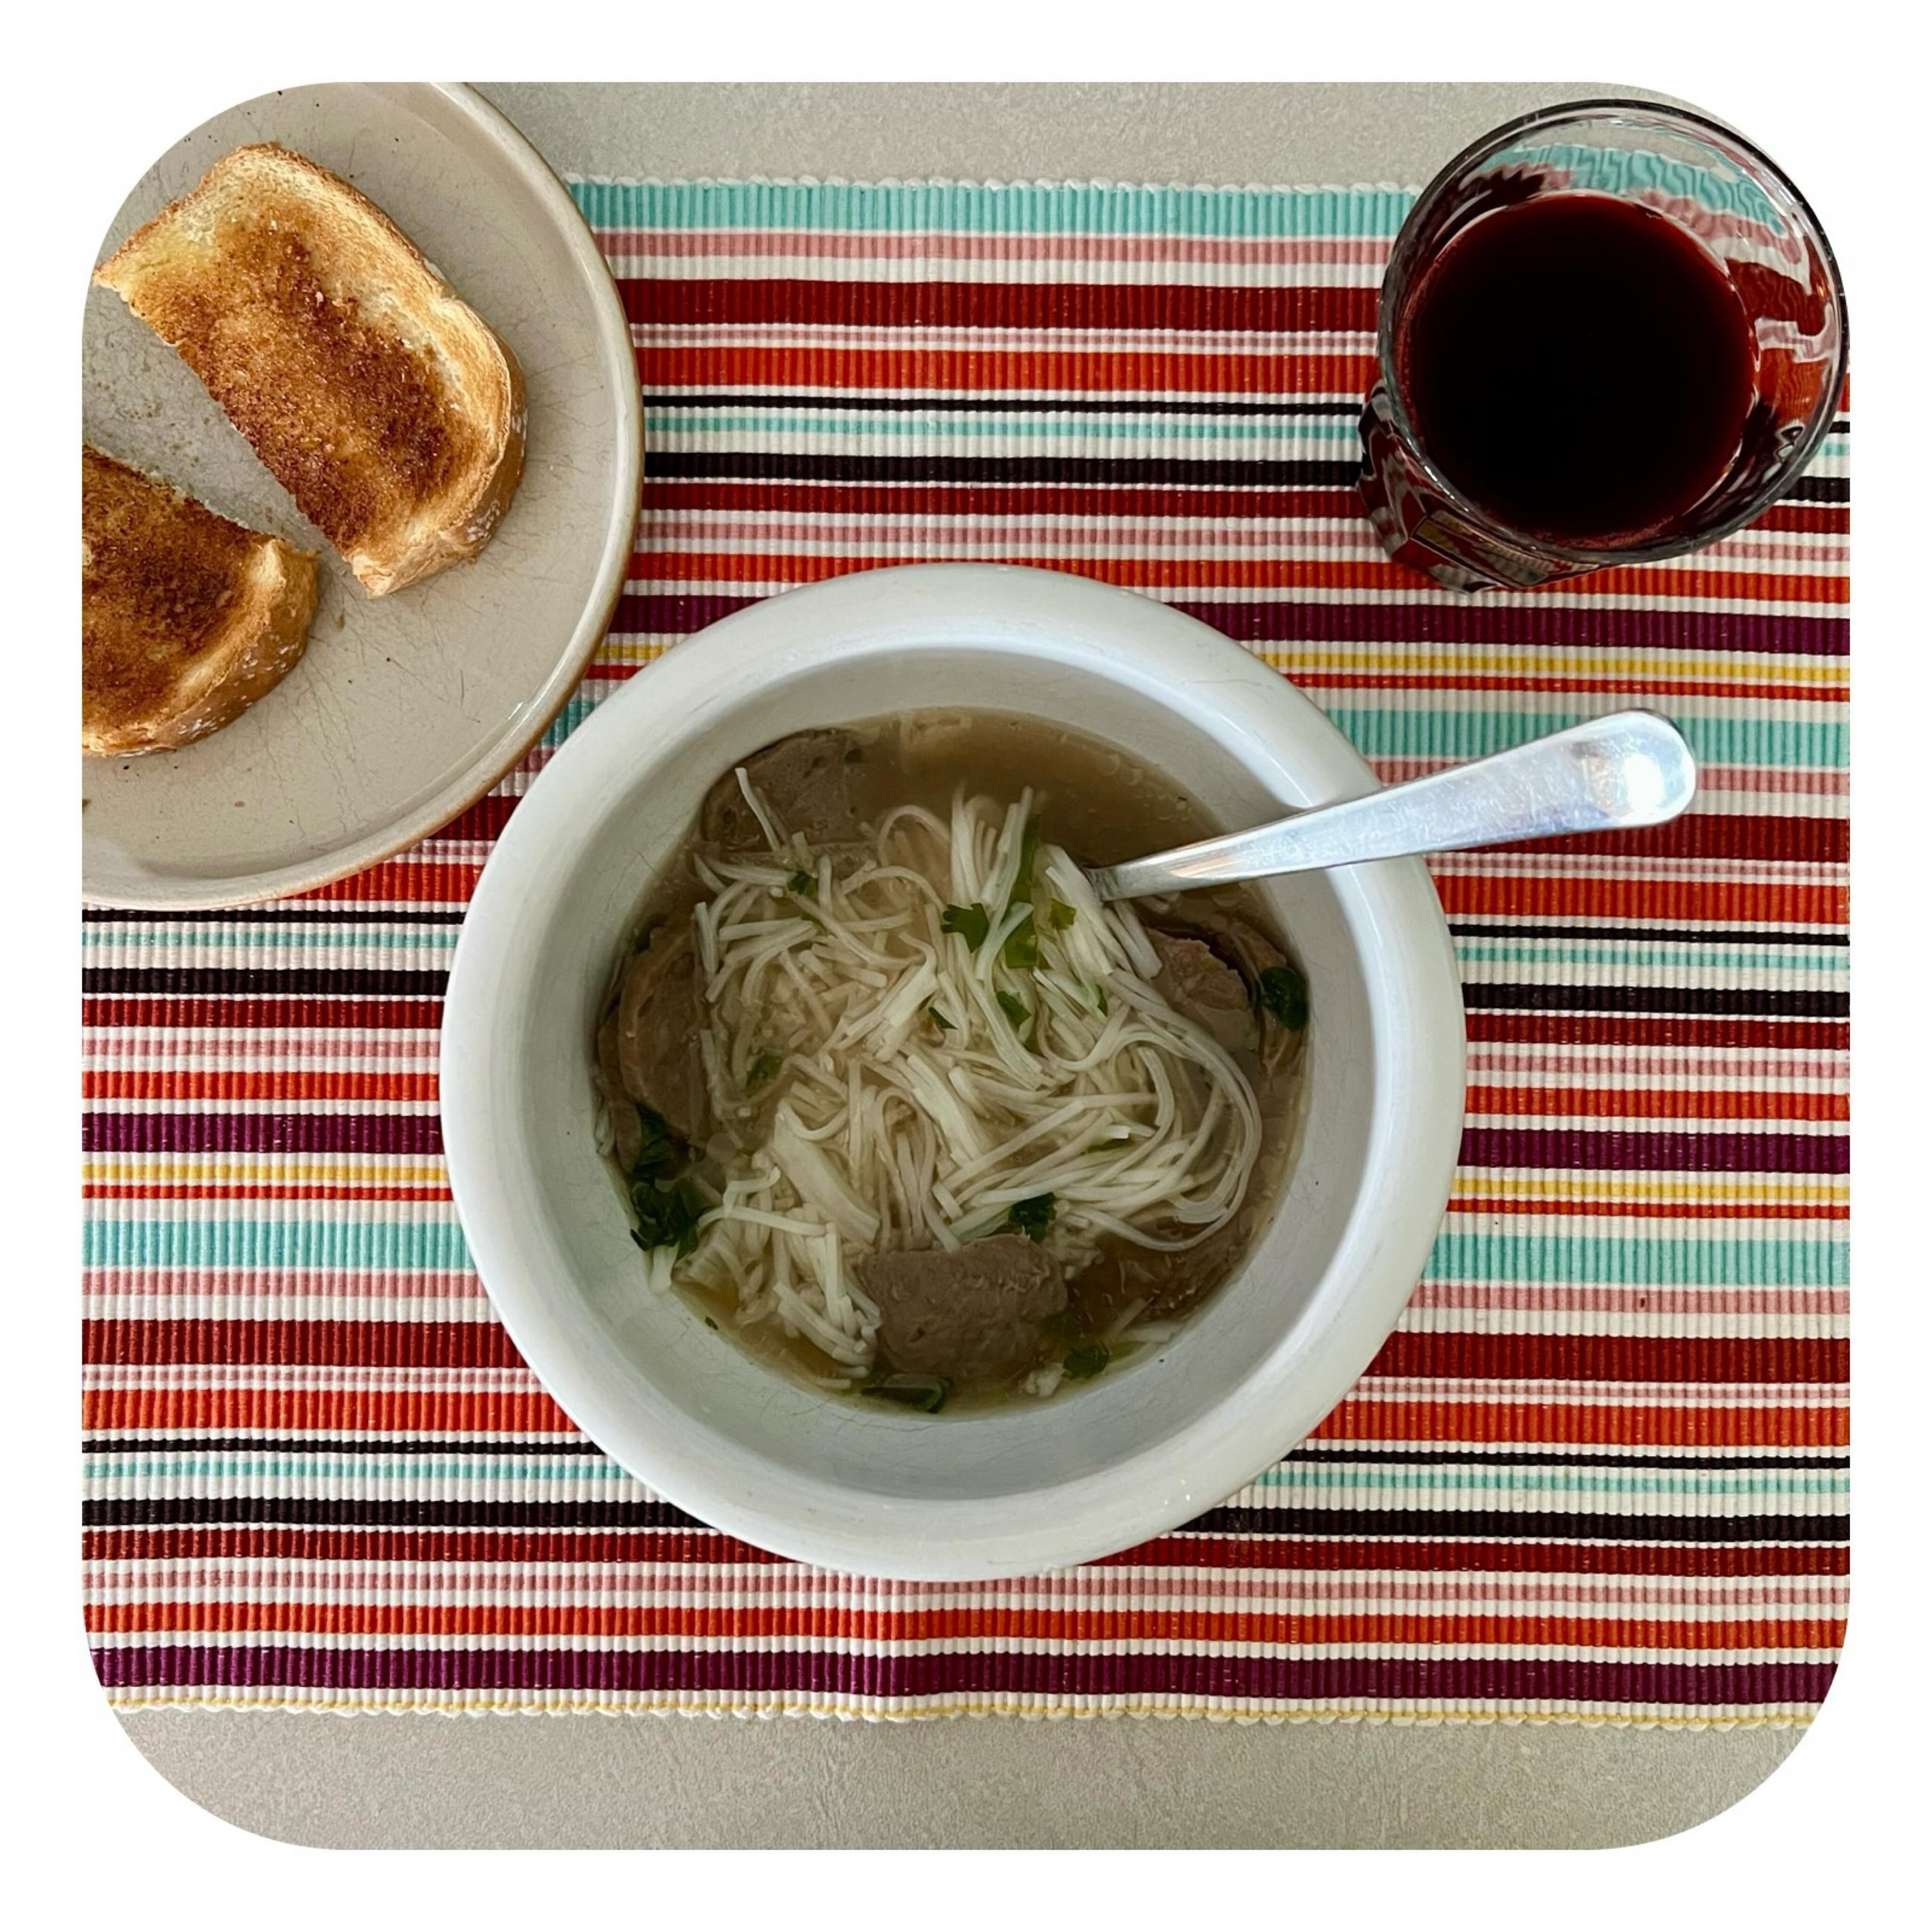 421 cals &bull; Late lunch/early dinner: the rest of yesterday&rsquo;s beef pho soup, 1 slice buttered white bread, beet juice.